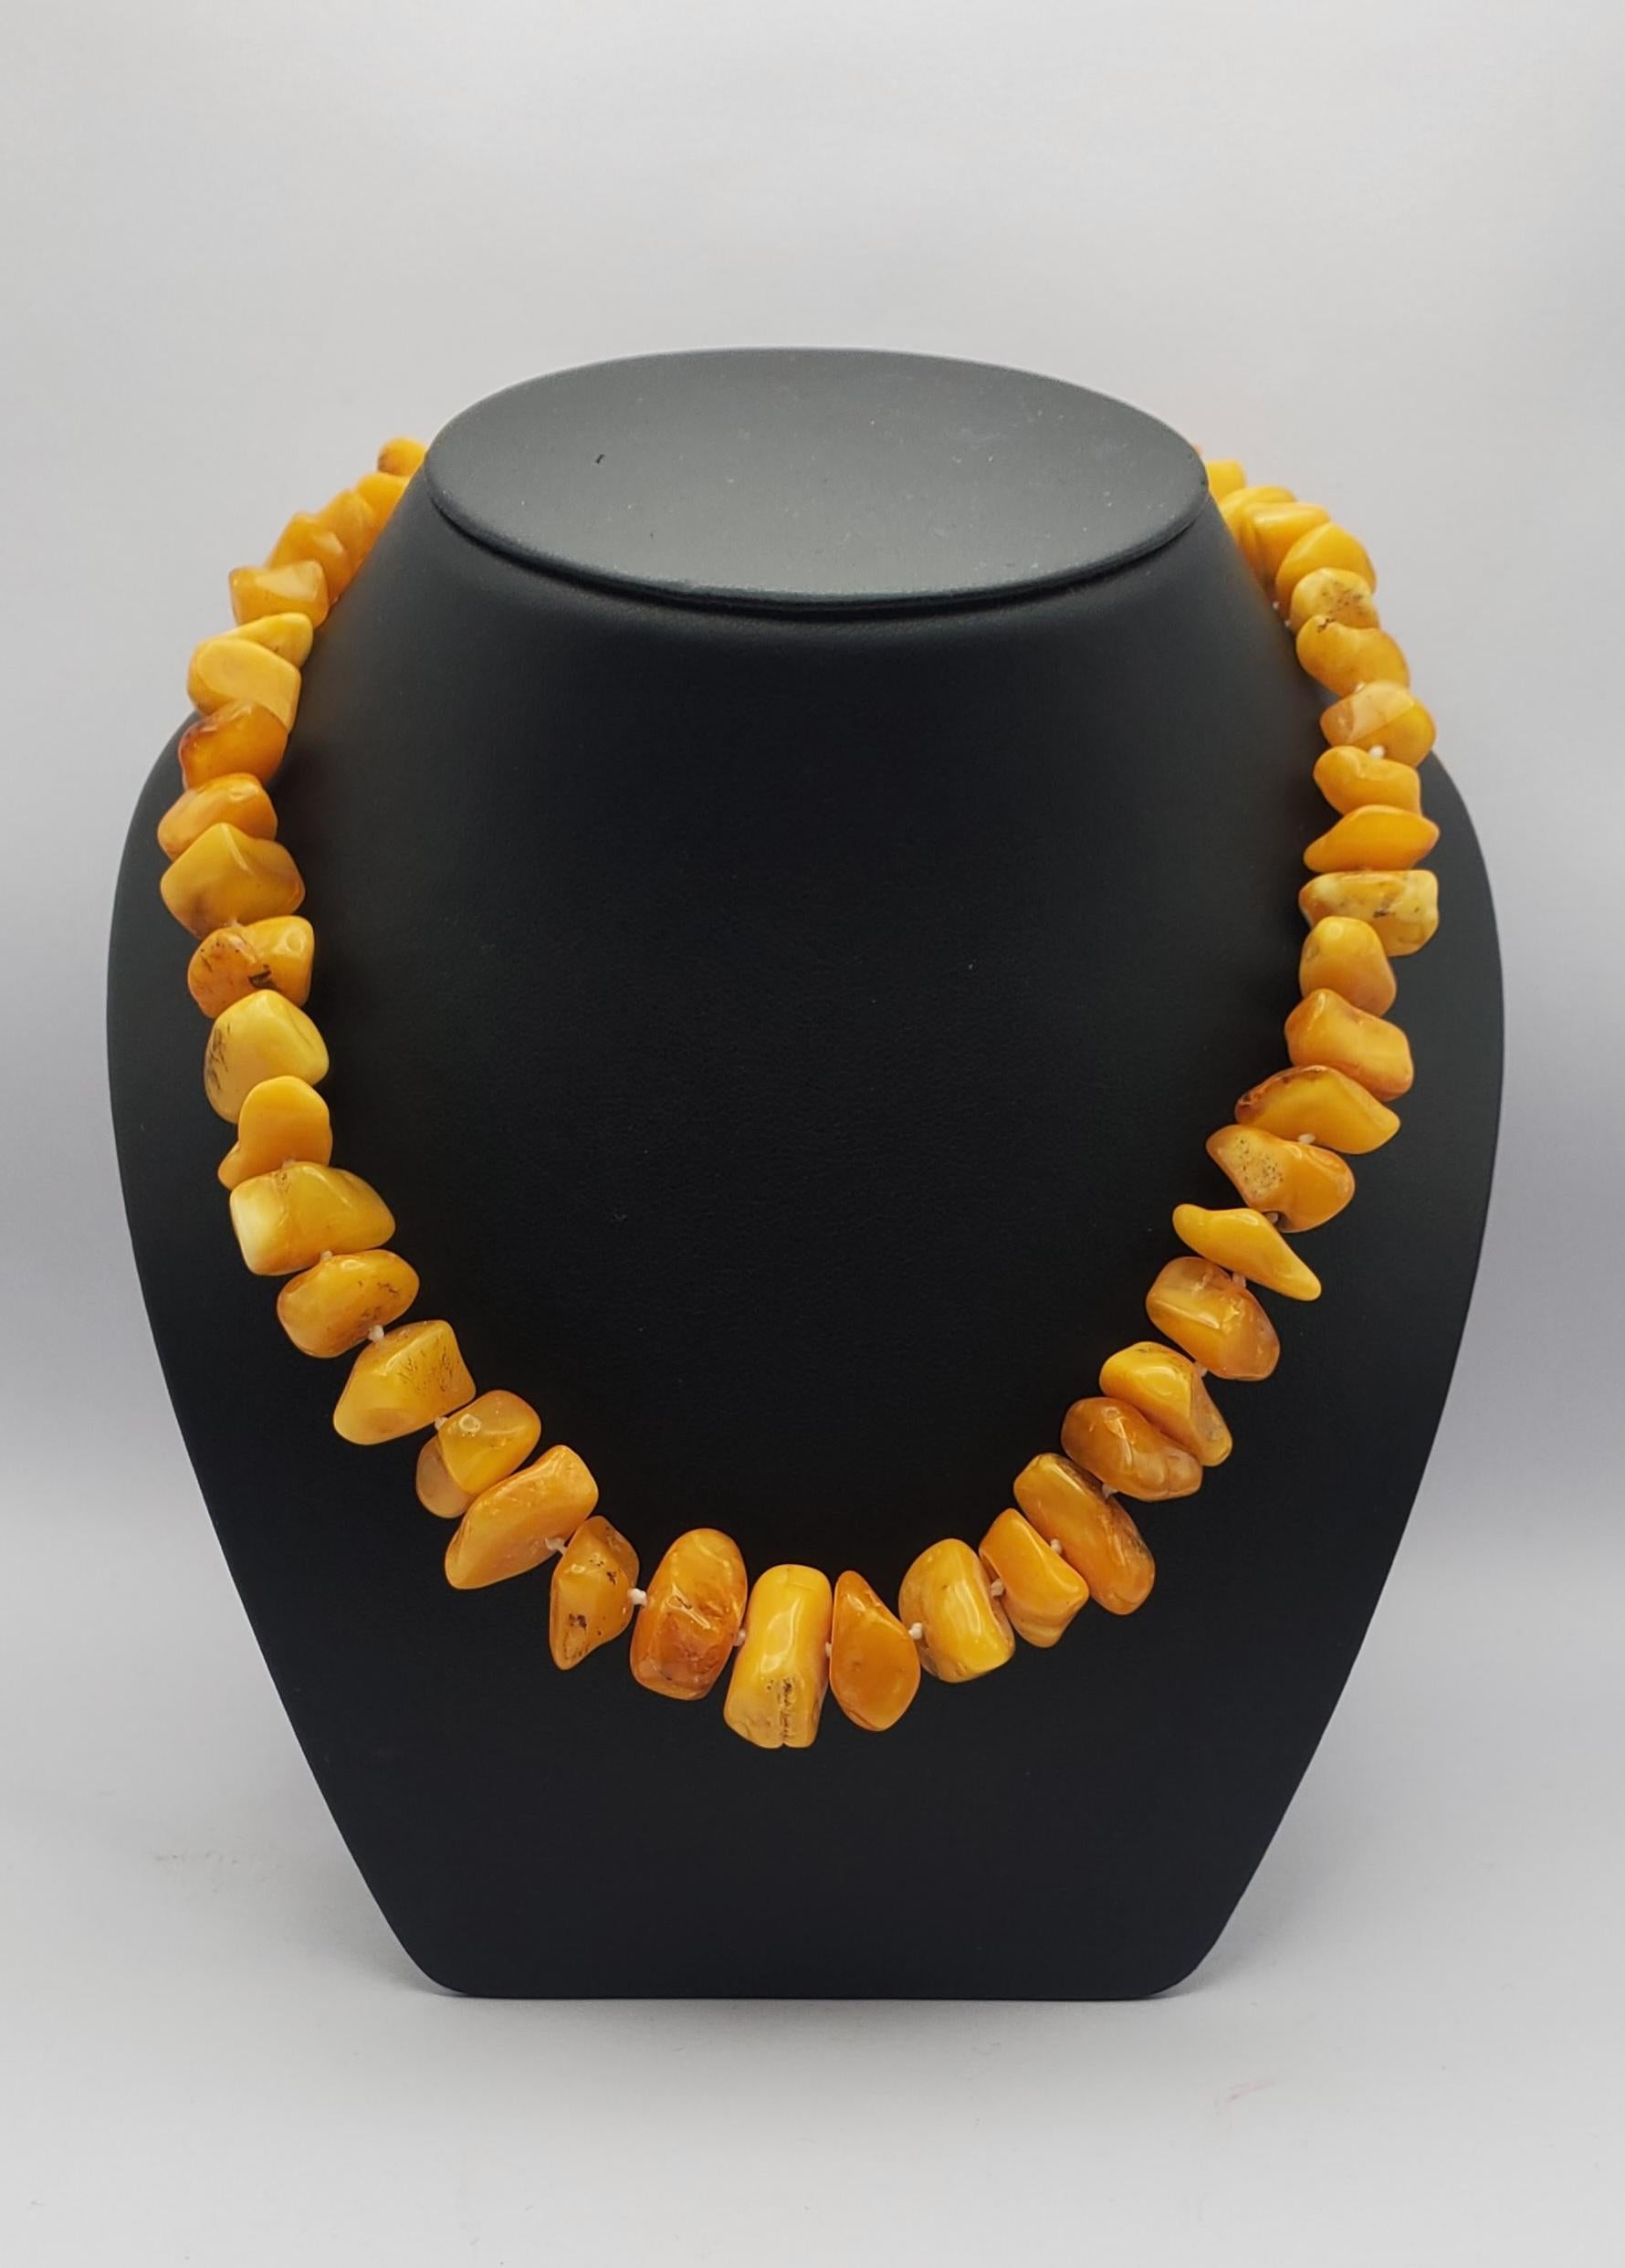 Gorgeous vintage butterscotch Baltic Amber bead necklace from the 1930s. The opaque warm honeycomb colored beads are strung continuously with knots in a graduated design. The strand is 26 inches long to comfortably fit over the head. There are some